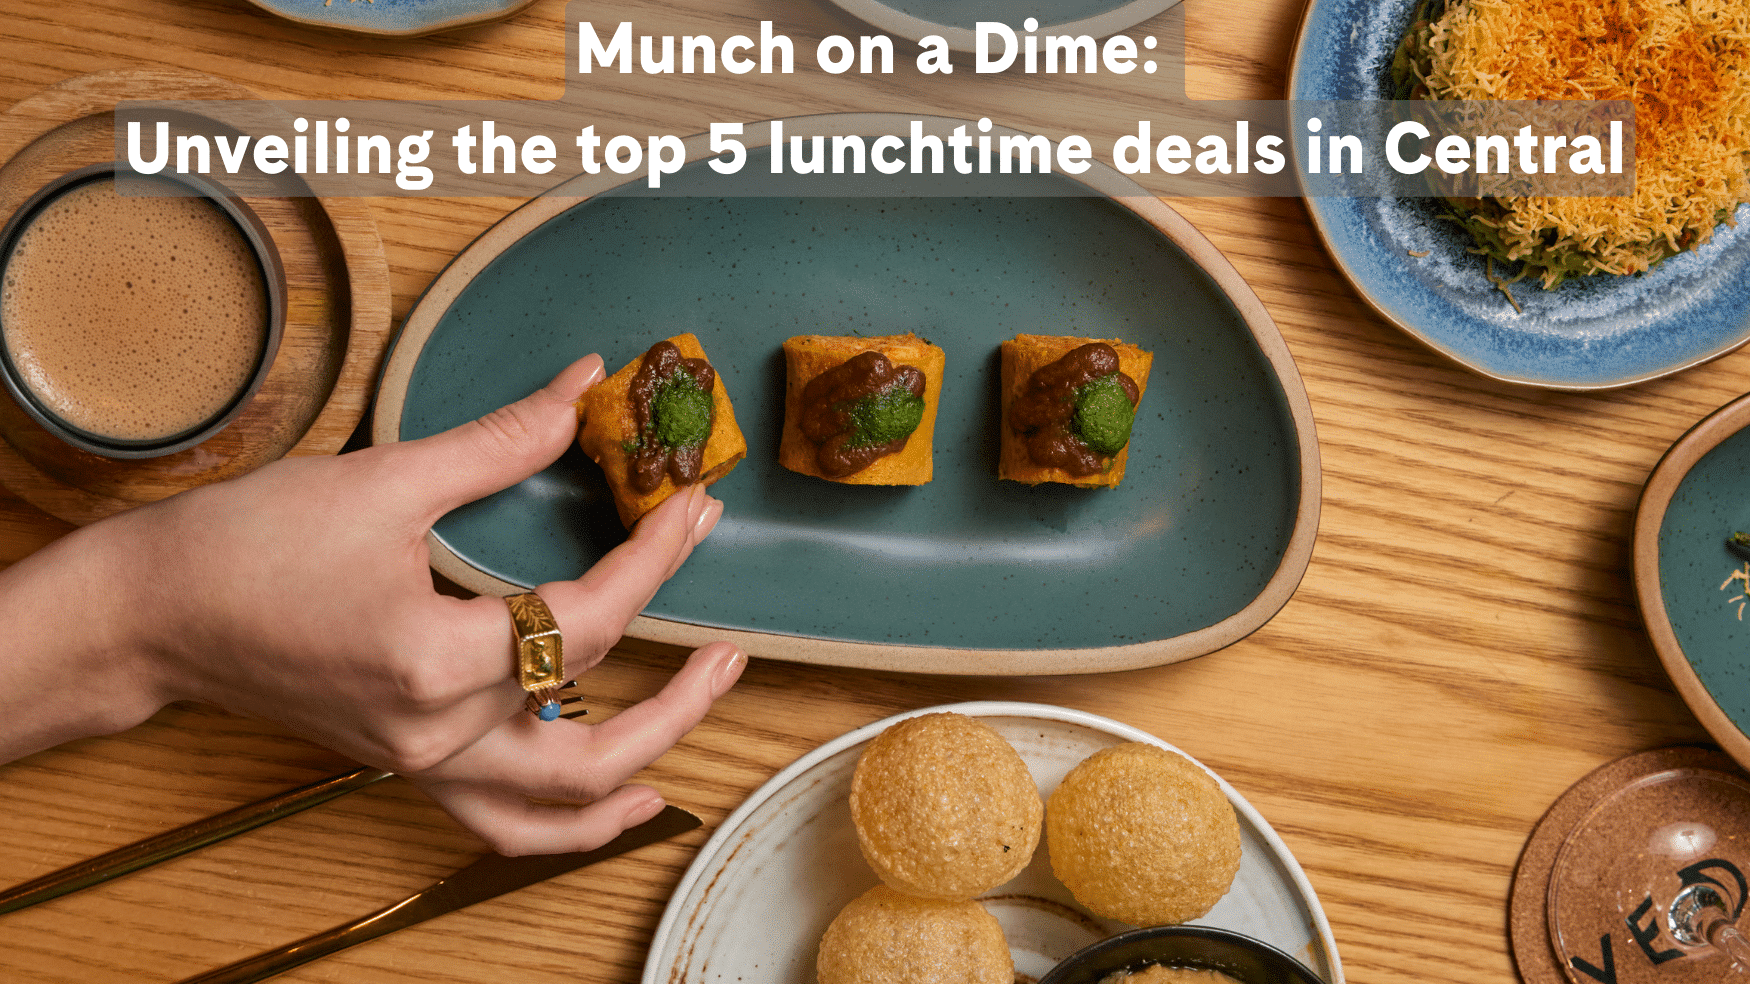 Munch on a Dime: Top 5 Lunch Deals in Central Hong Kong